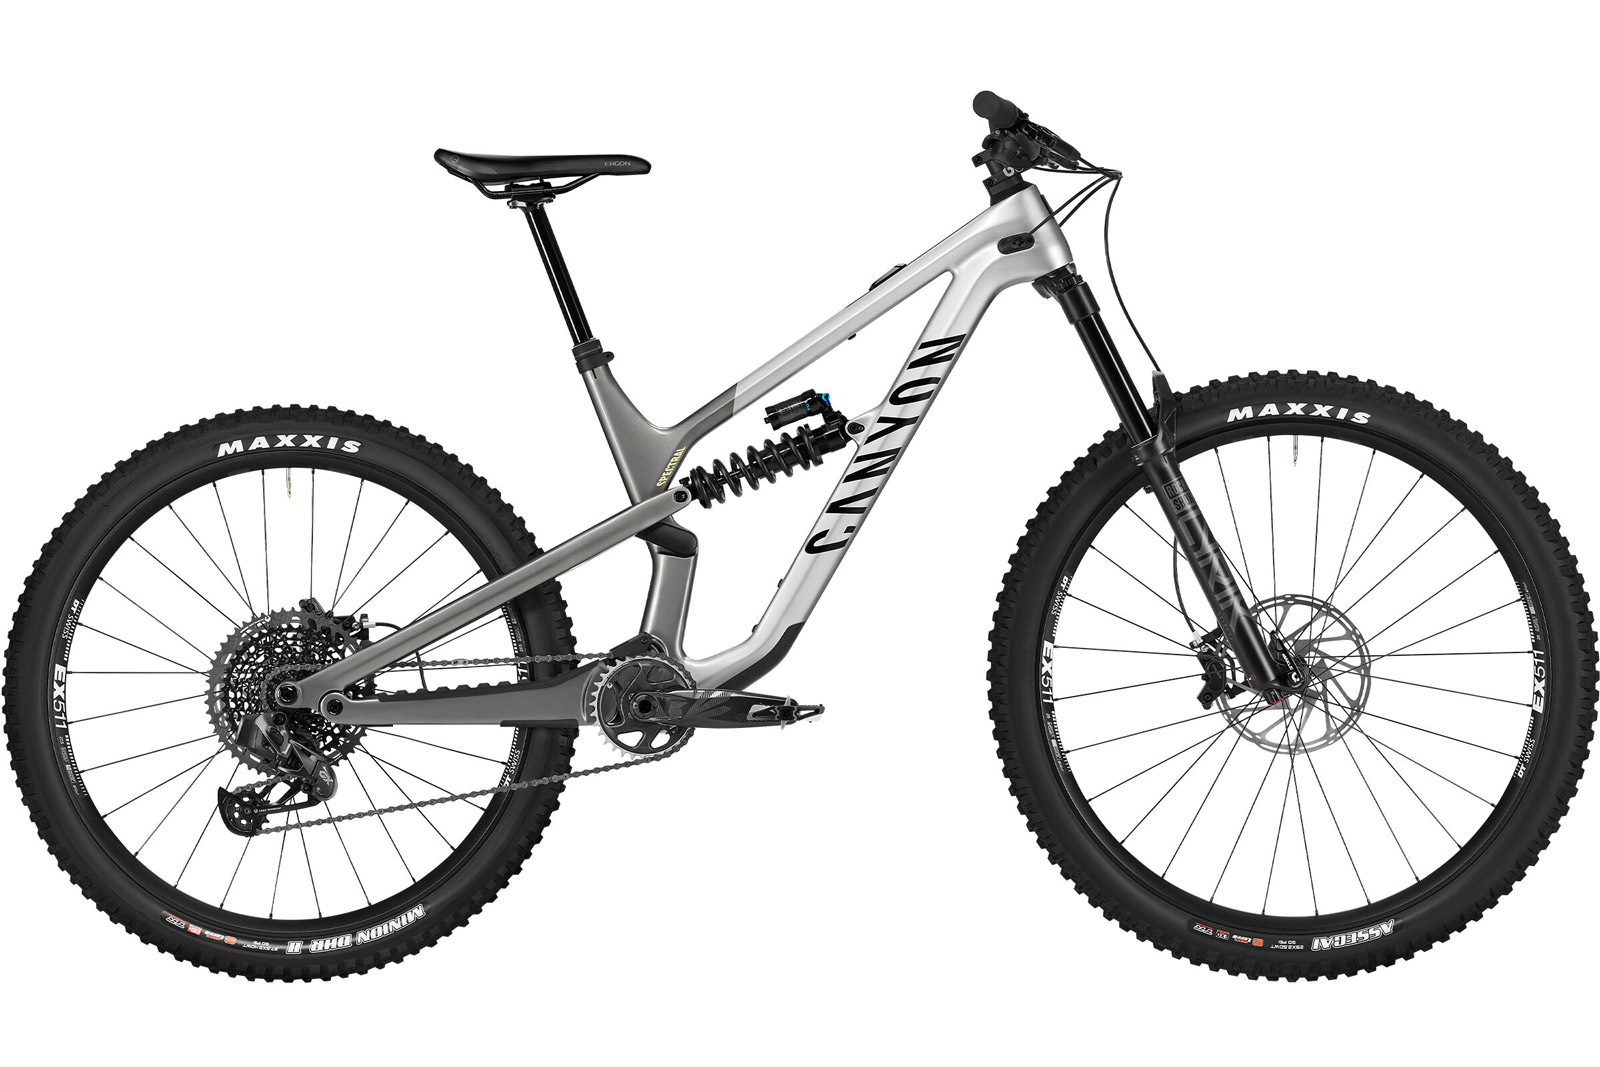 canyon spectral mullet kis cf 8 carbon 150mm travel mtb